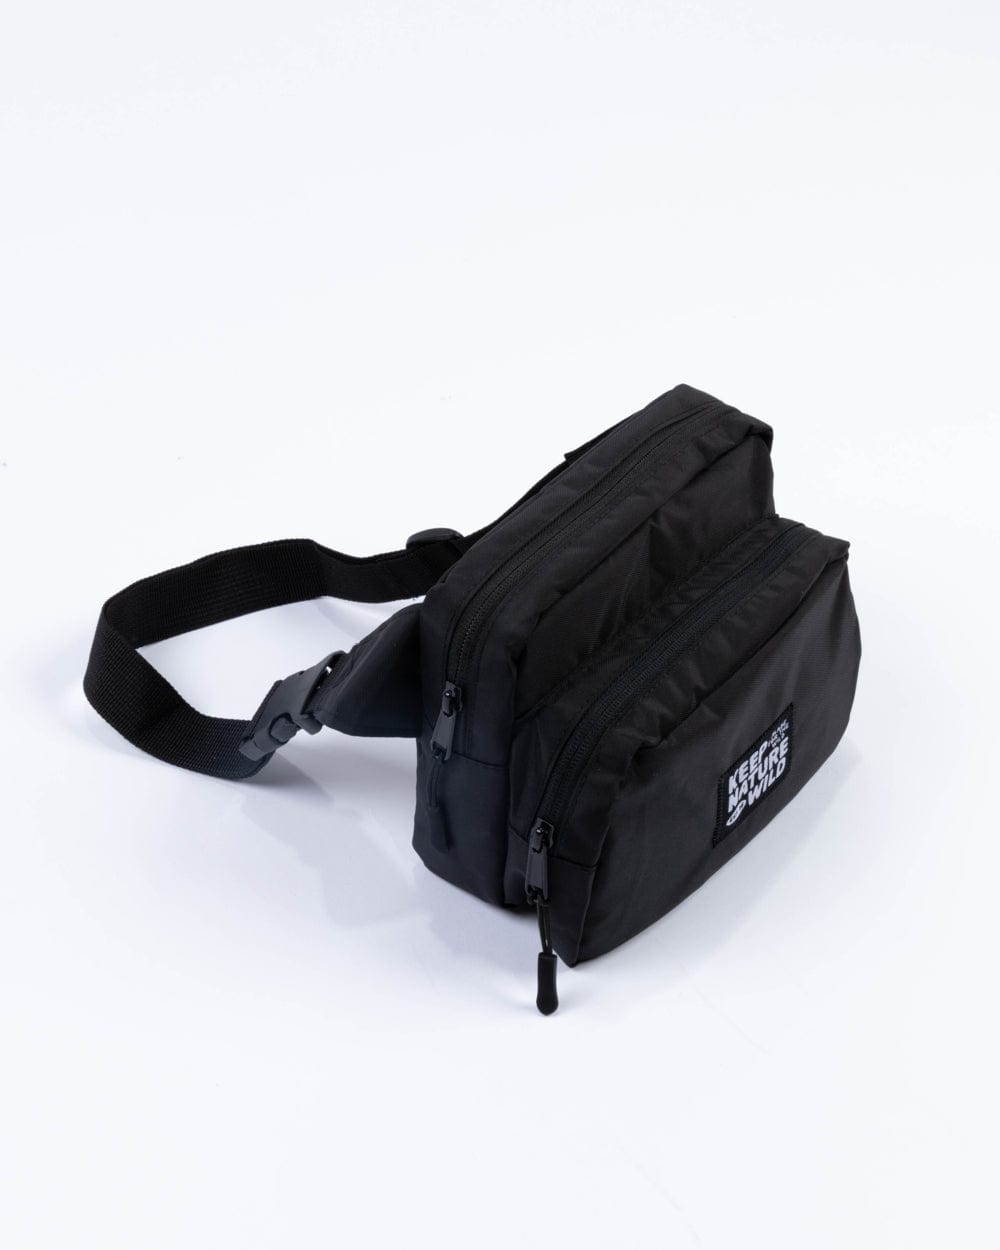 Keep Nature Wild Fanny Pack KNW Fanny Pack | Black